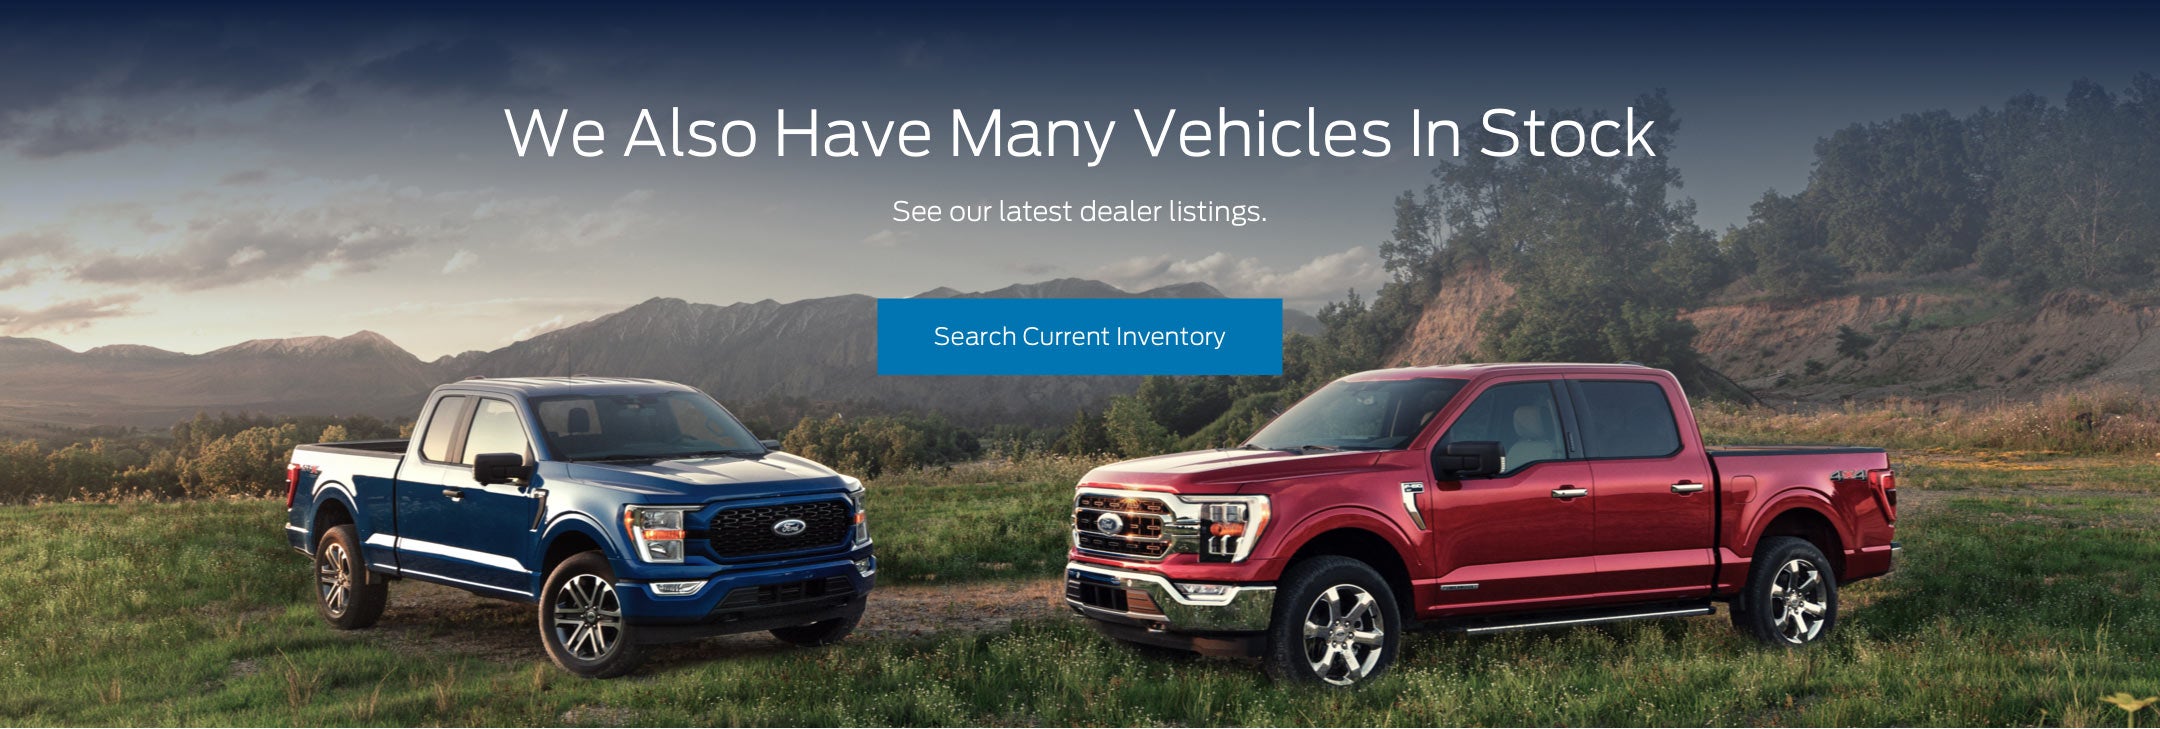 Ford vehicles in stock | Century Ford of Mt. Airy, Inc. in Mt Airy MD